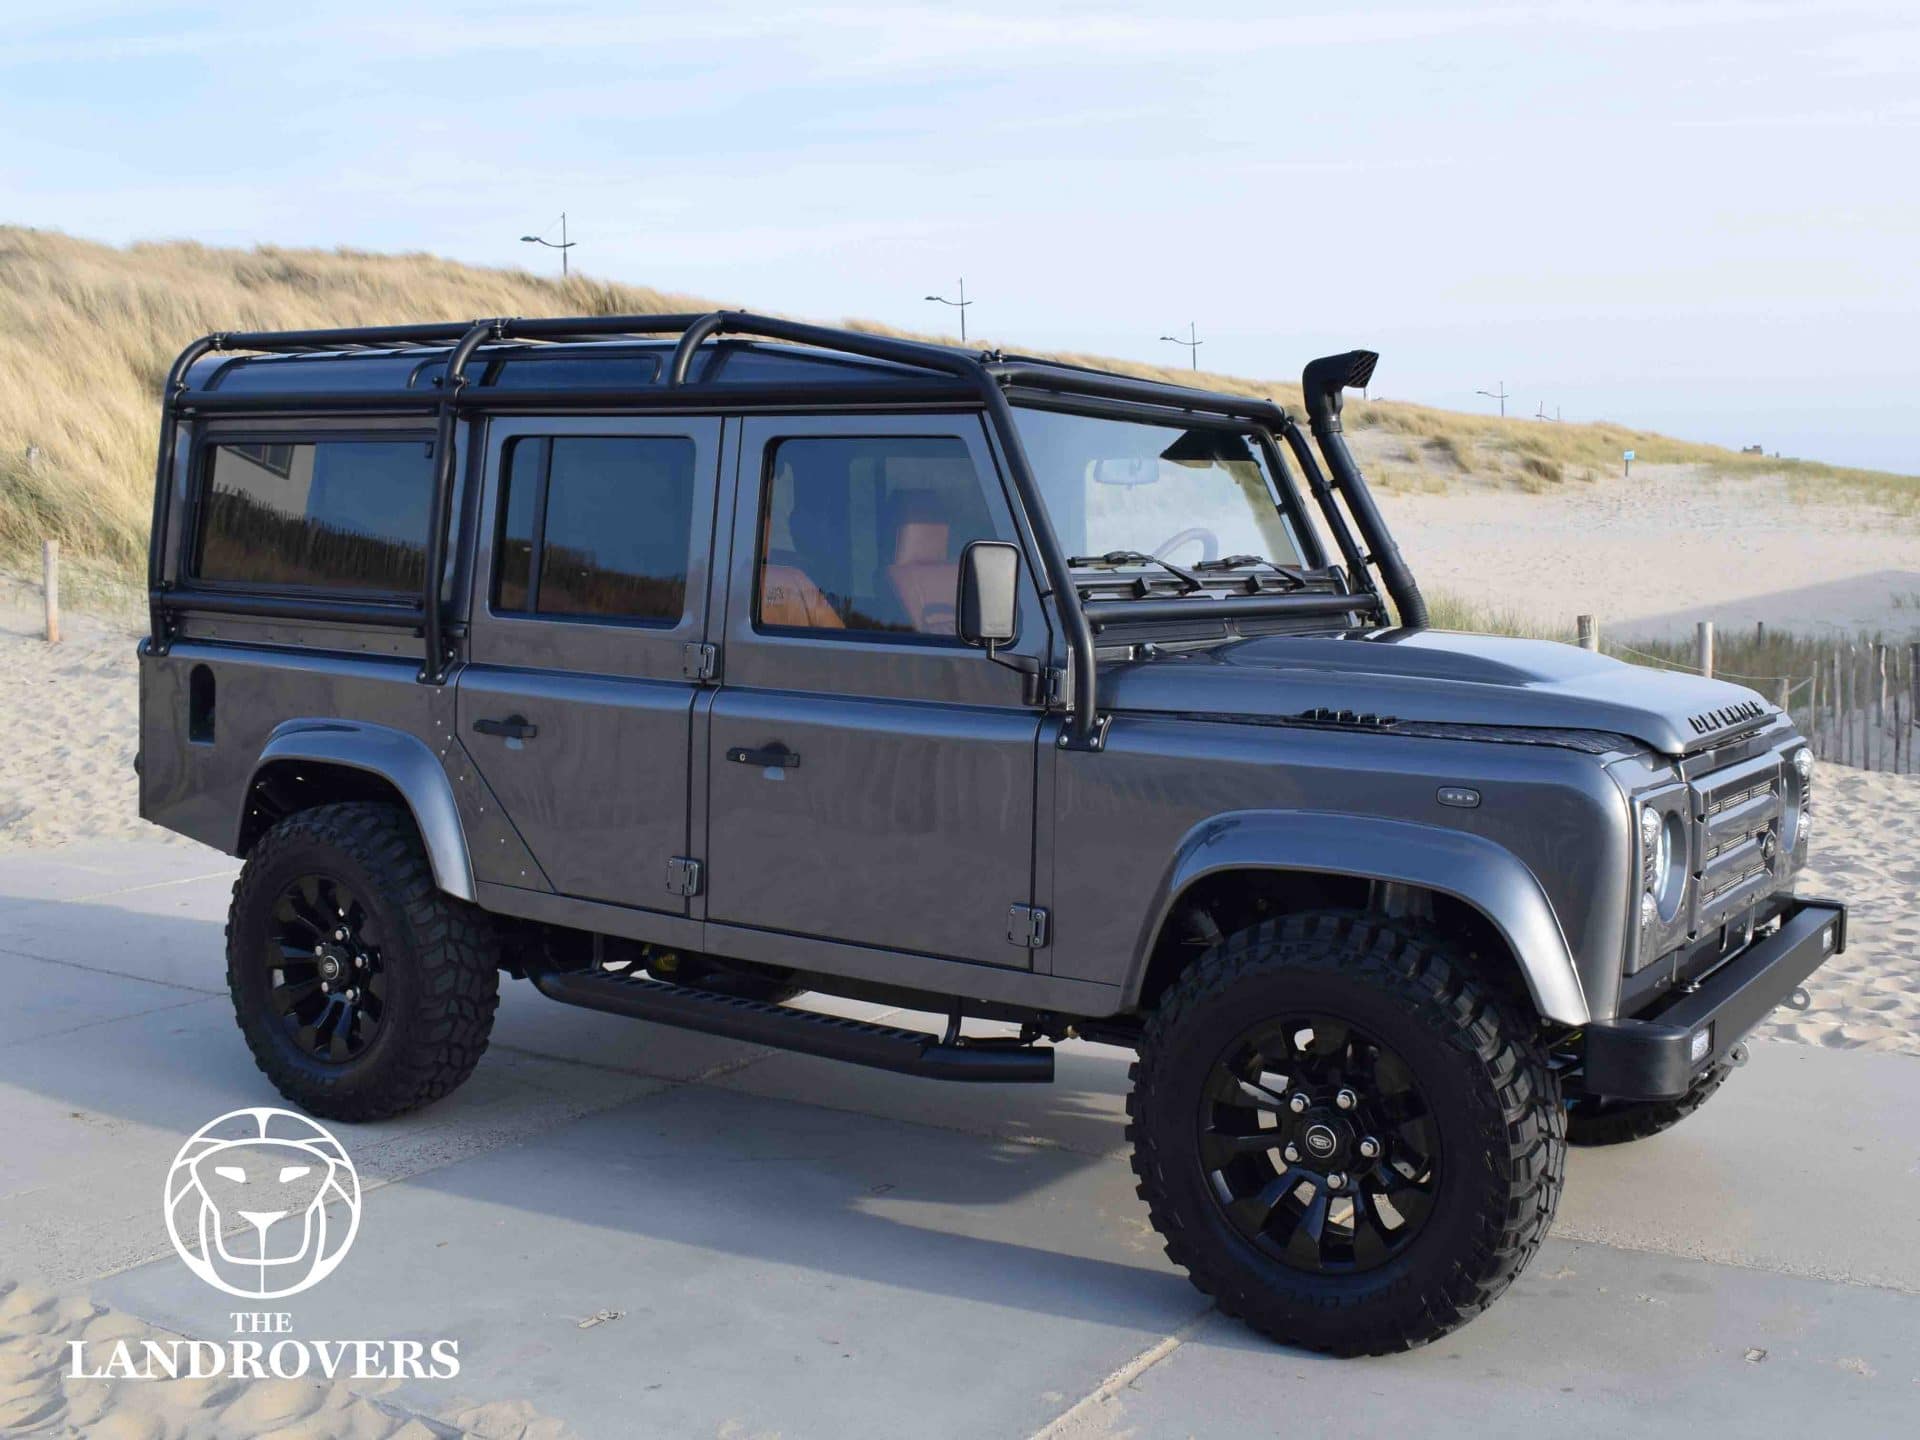 Modified Custom Land Rover Defender Landrovers